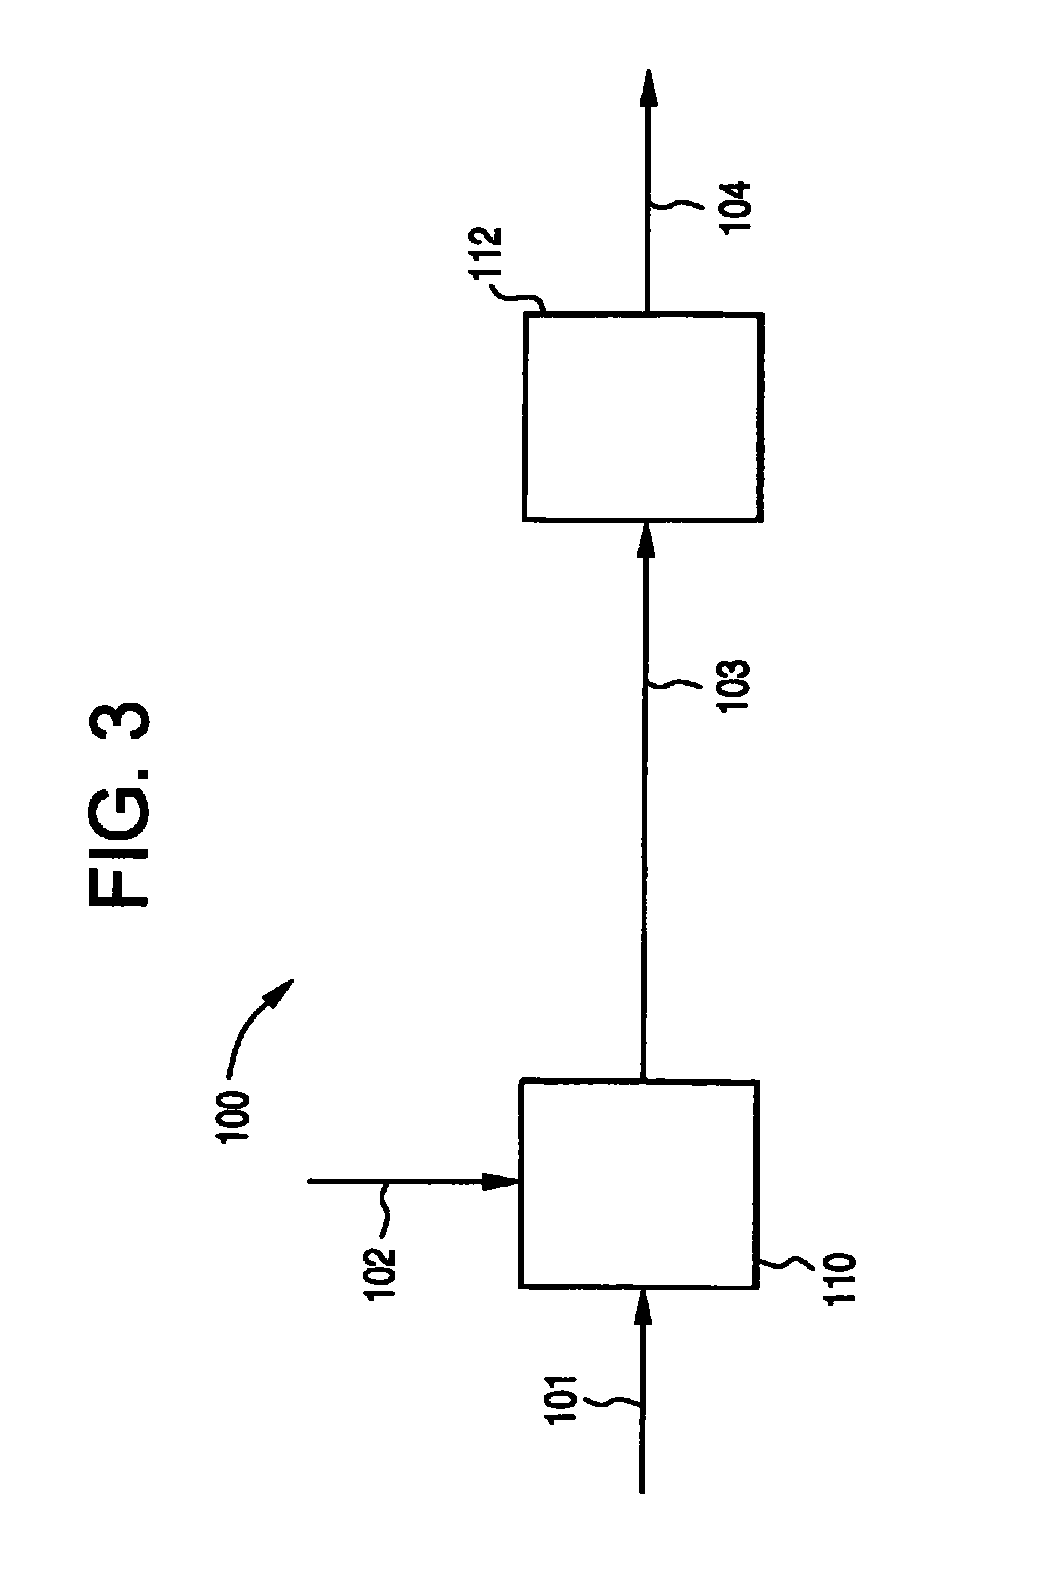 Process and apparatus for producing chlorohydrin